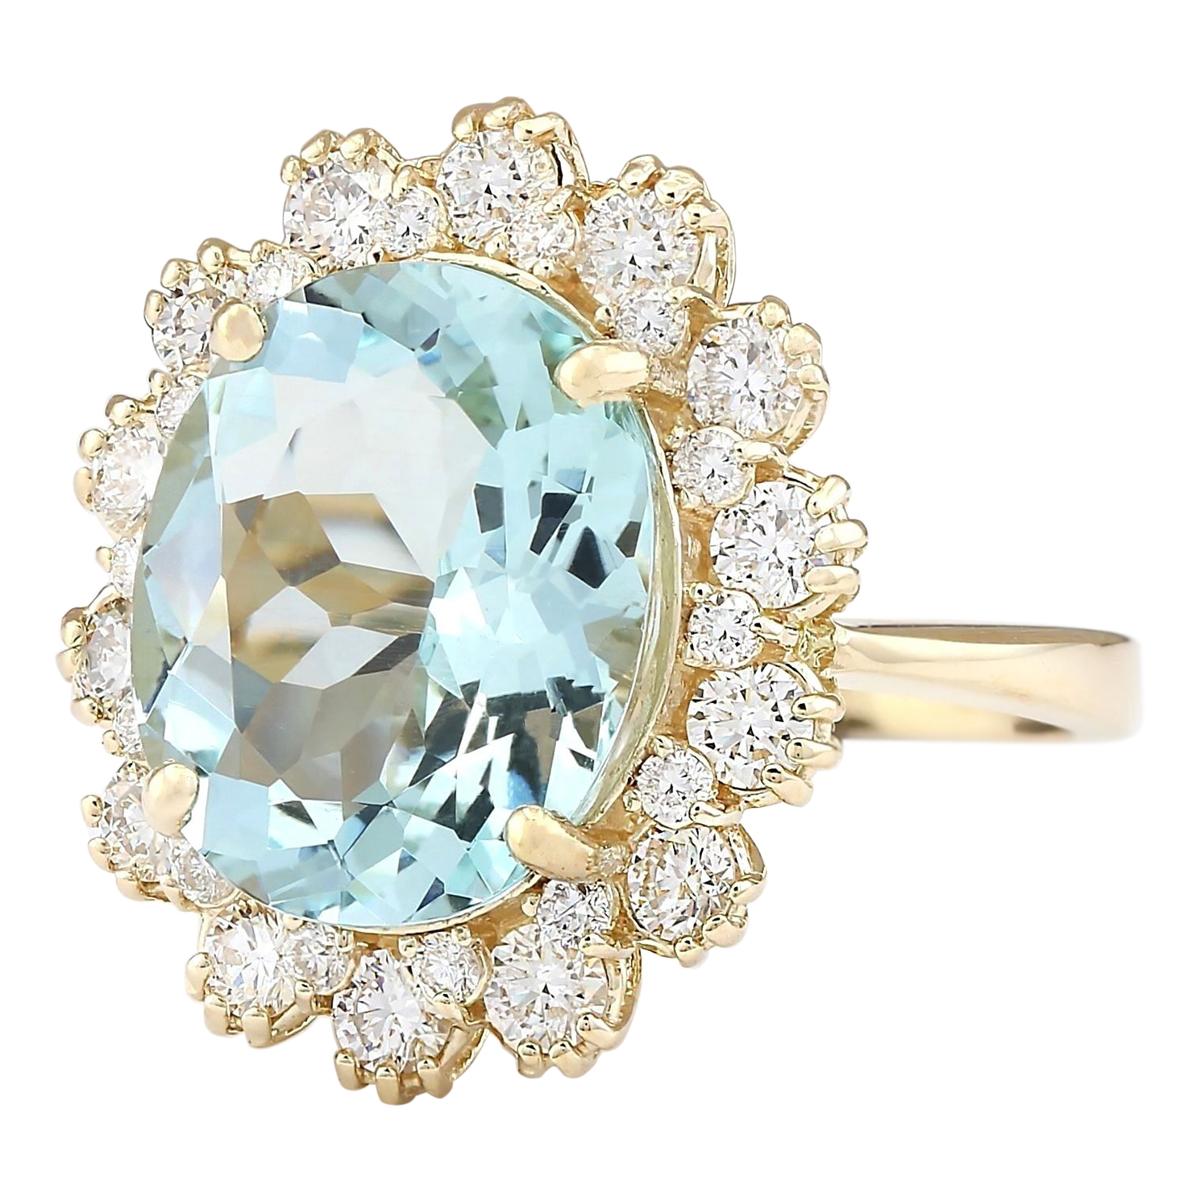 Stamped: 14K Yellow Gold
Total Ring Weight: 6.0 Grams
Total Natural Aquamarine Weight is 5.61 Carat (Measures: 14.00x10.00 mm)
Color: Blue
Total Natural Diamond Weight is 1.12 Carat
Color: F-G, Clarity: VS2-SI1
Face Measures: 21.15x17.80 mm
Sku: